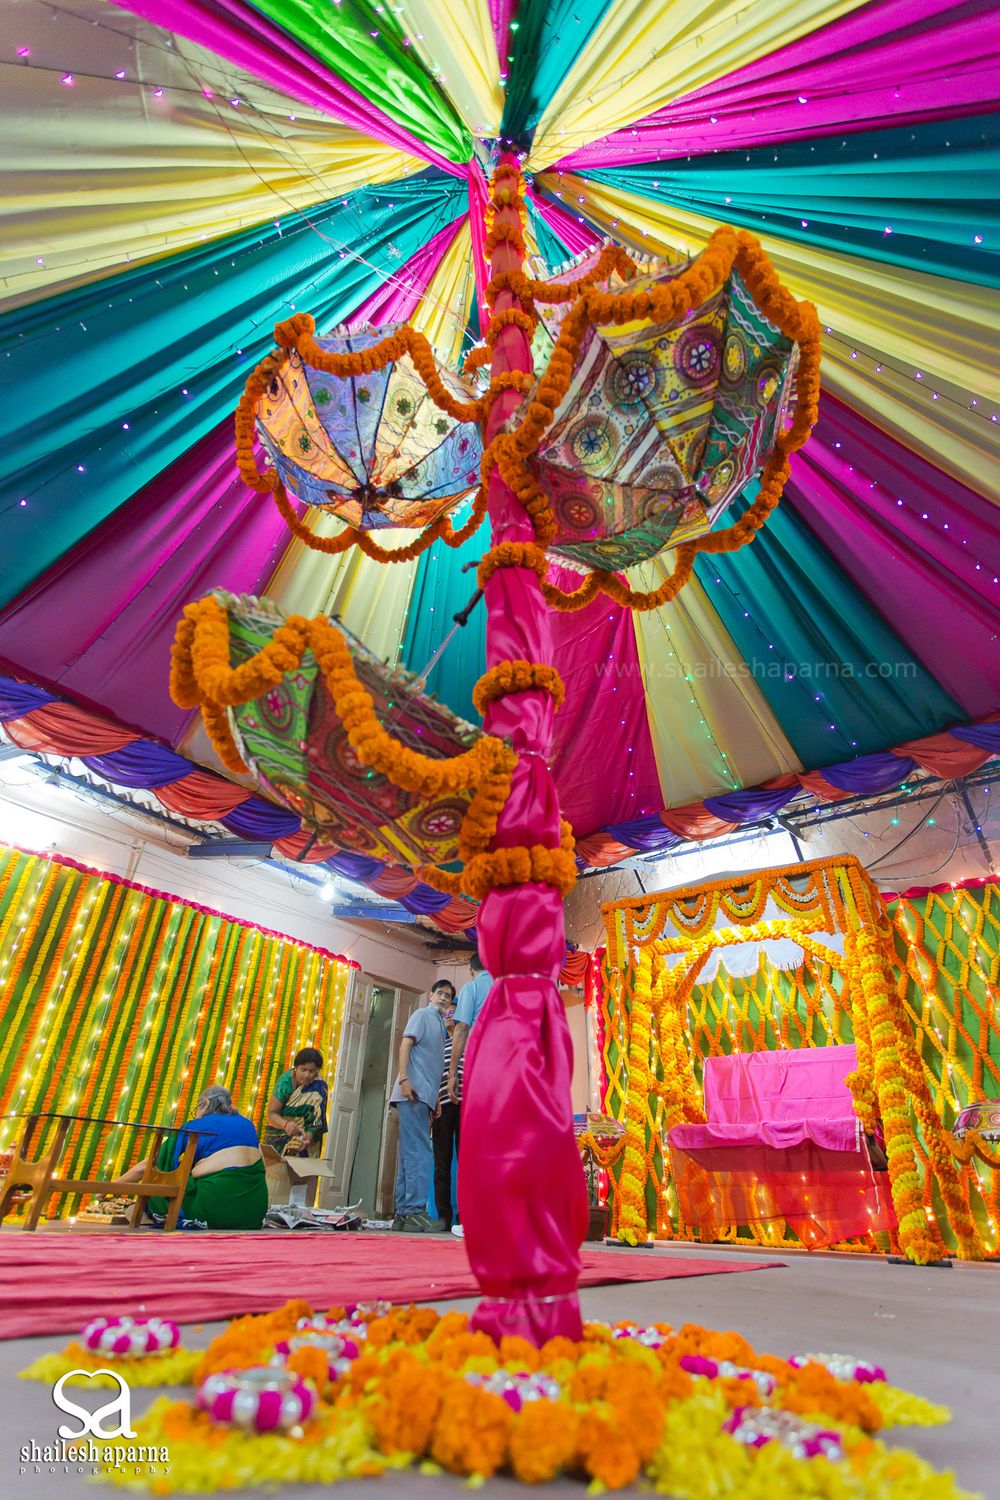 Photo of Colourful Tent Decor with Umbrellas and Genda Phool